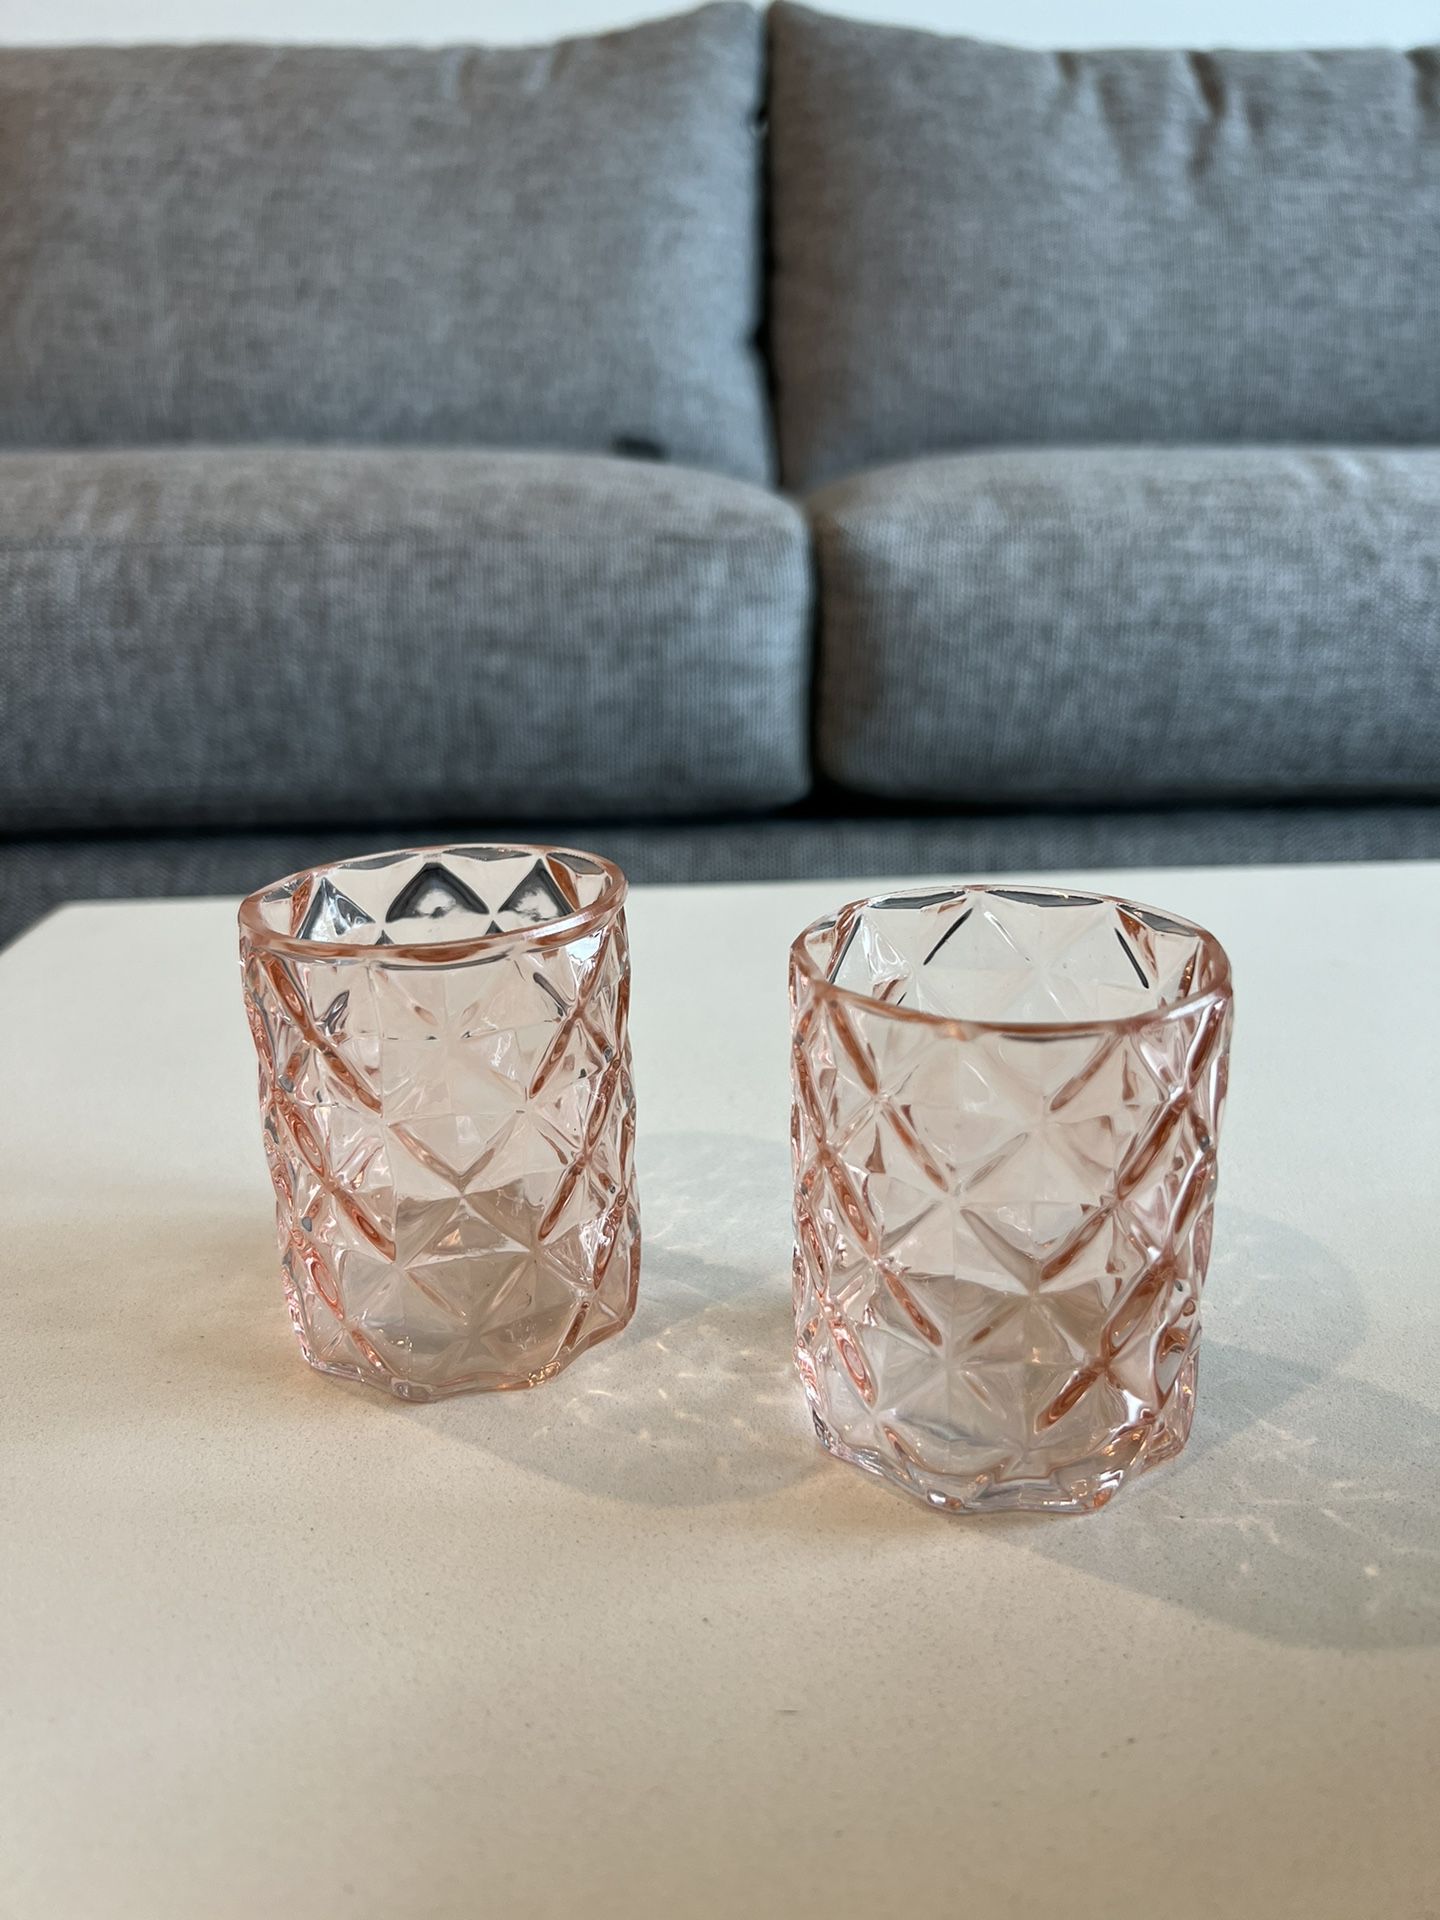 Blush pink glass candle holders 2.75” H - both for $5!